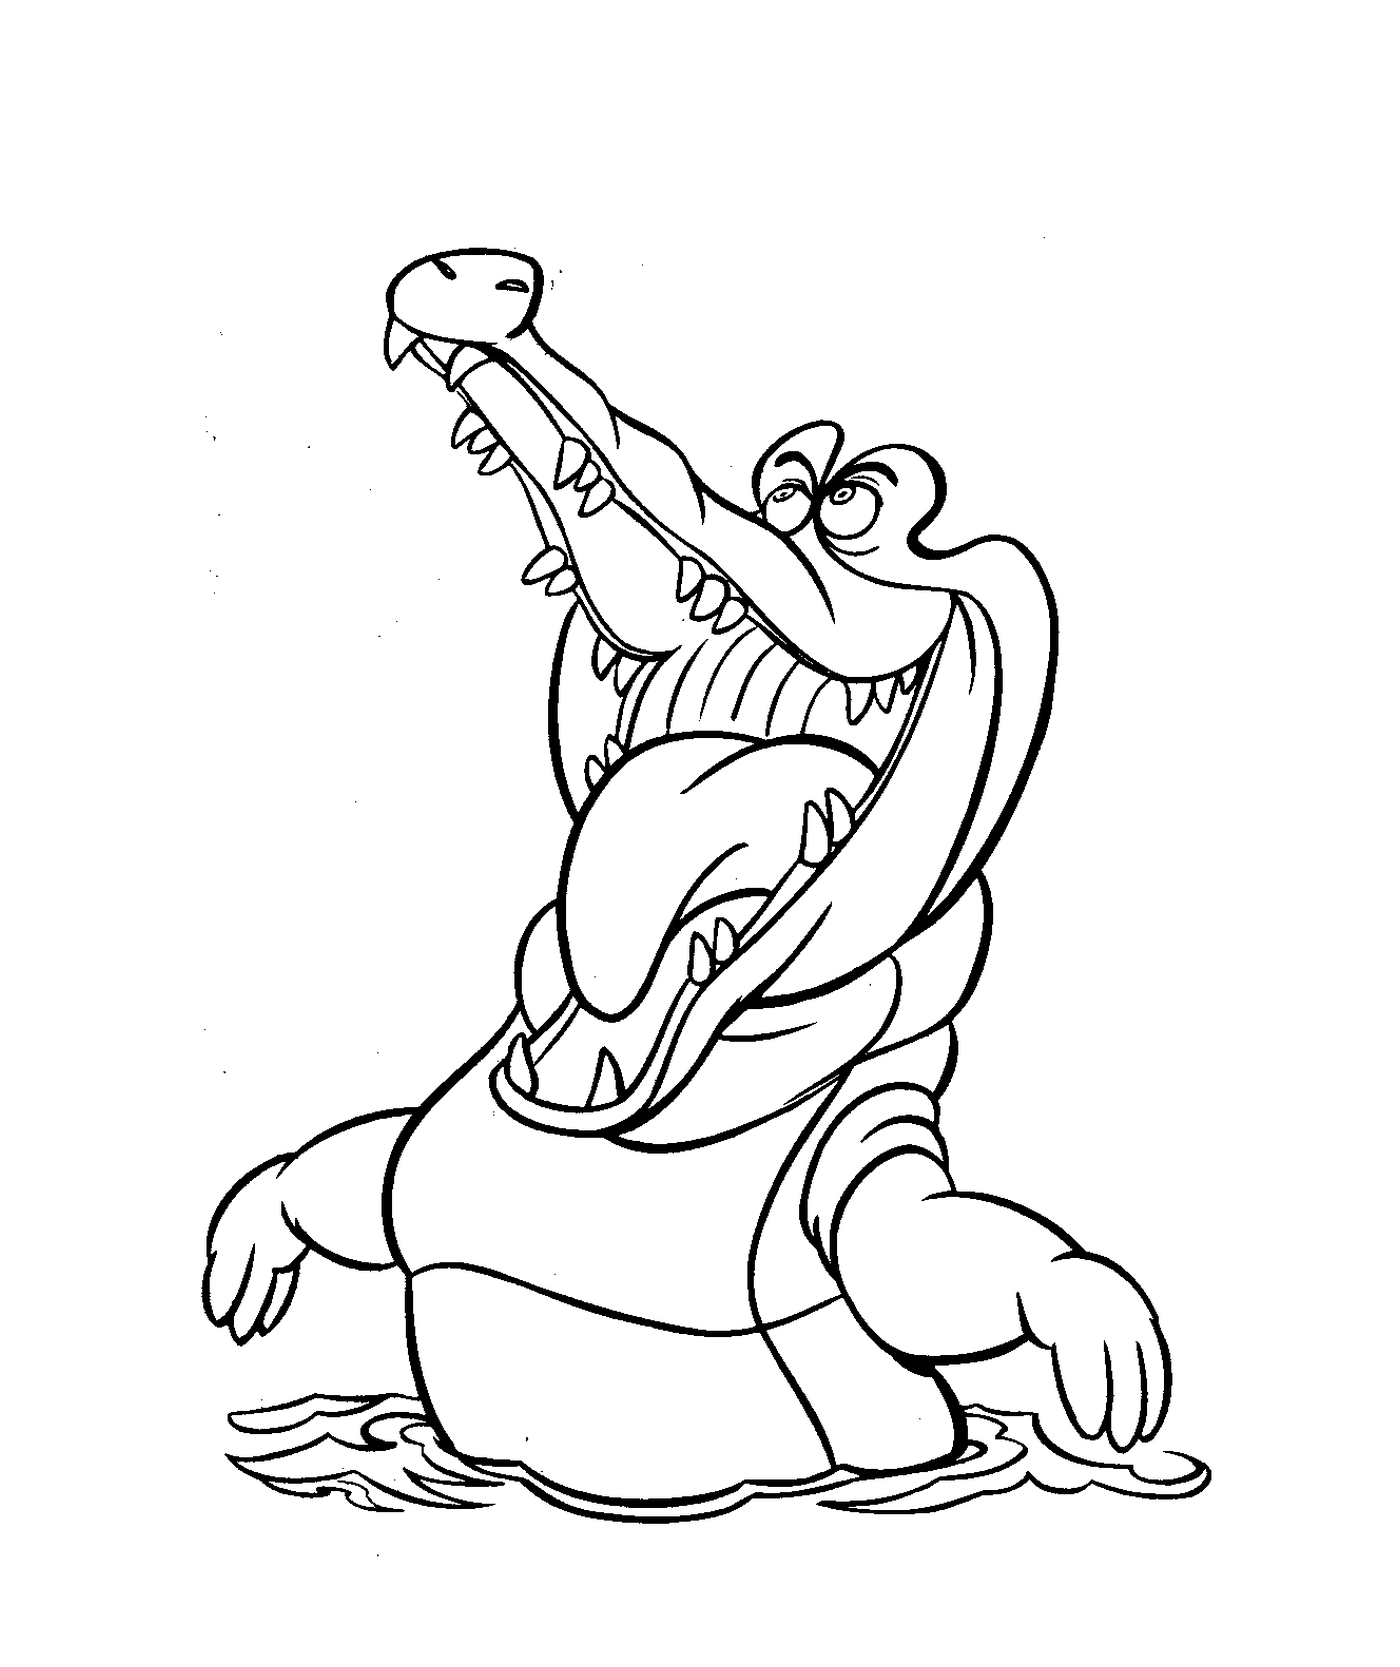  A crocodile by Peter Pan, the Disney characters for children 